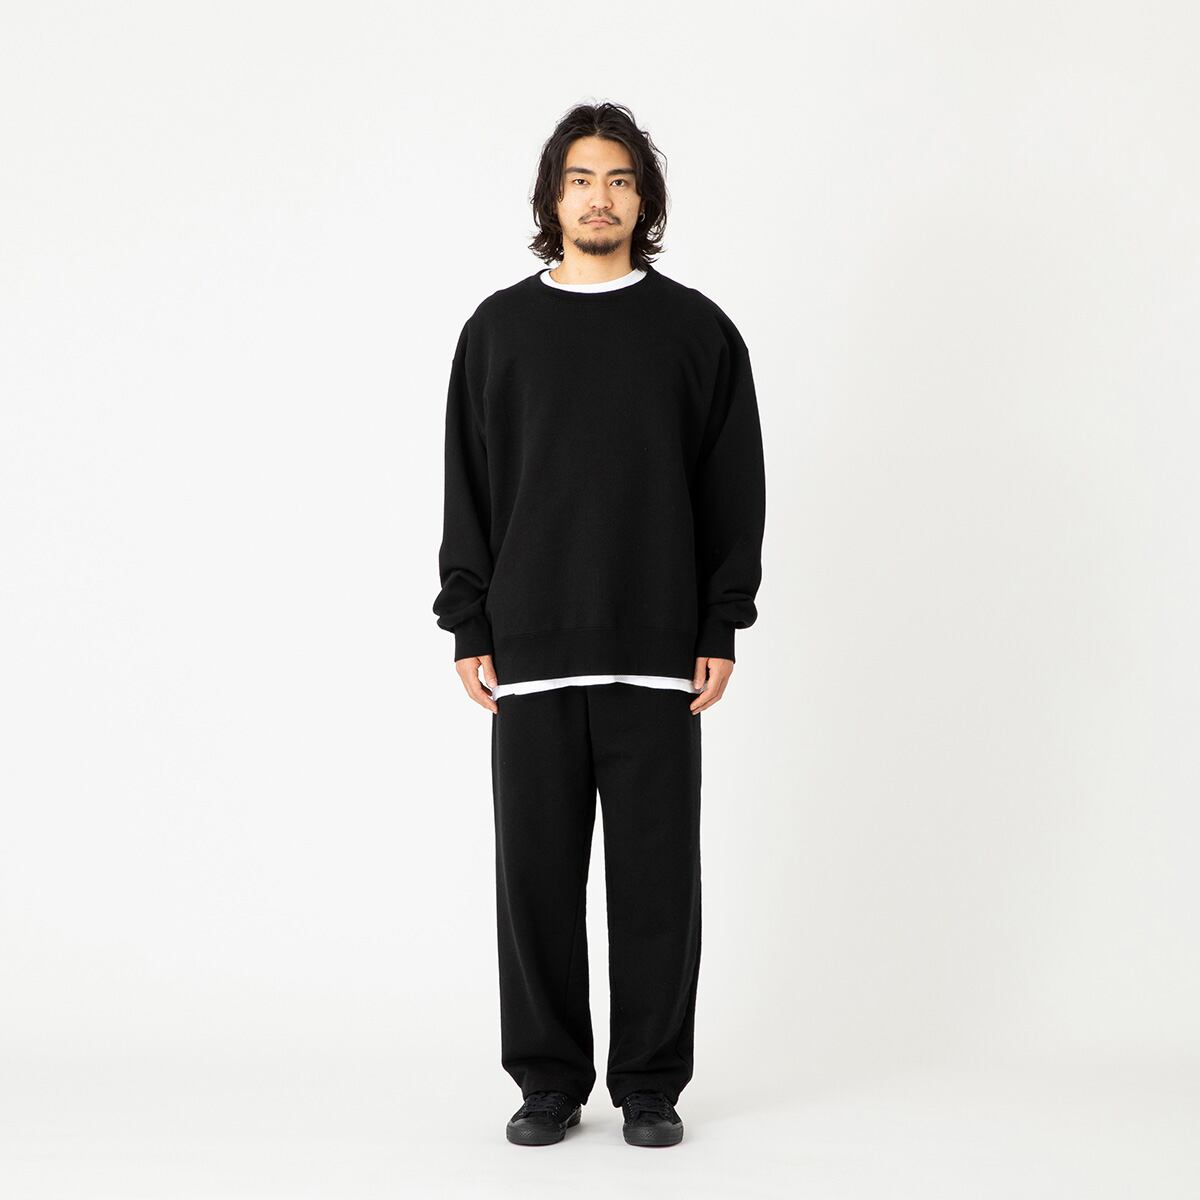 Those Days Crew Neck - New 3 Color & Black Restock | Just Right